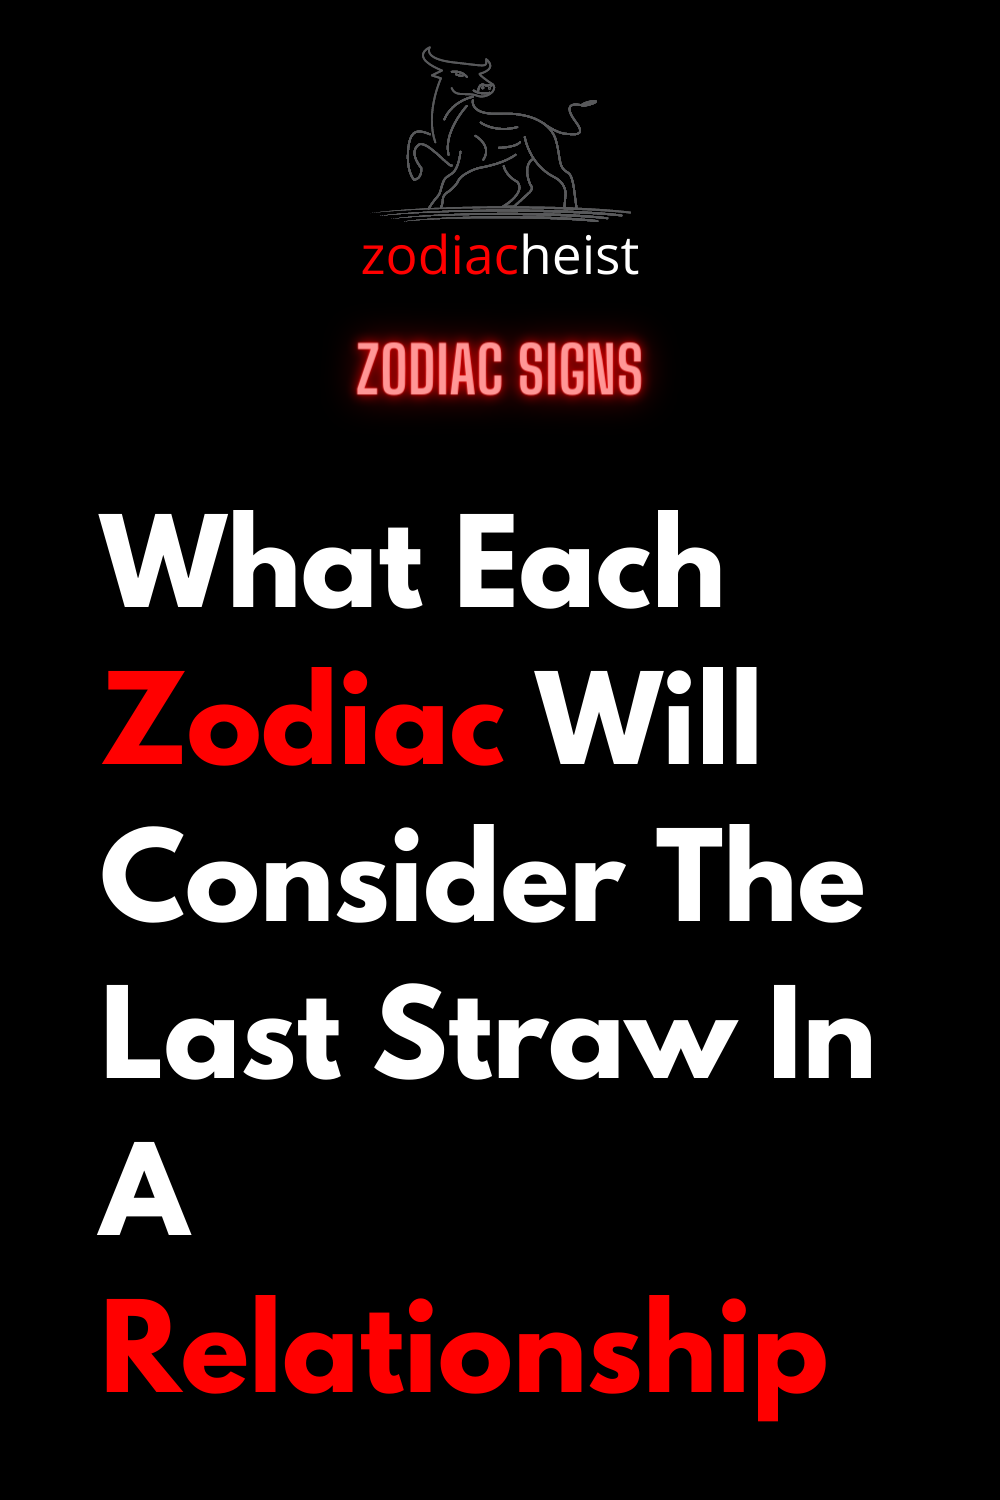 What Each Zodiac Will Consider The Last Straw In A Relationship